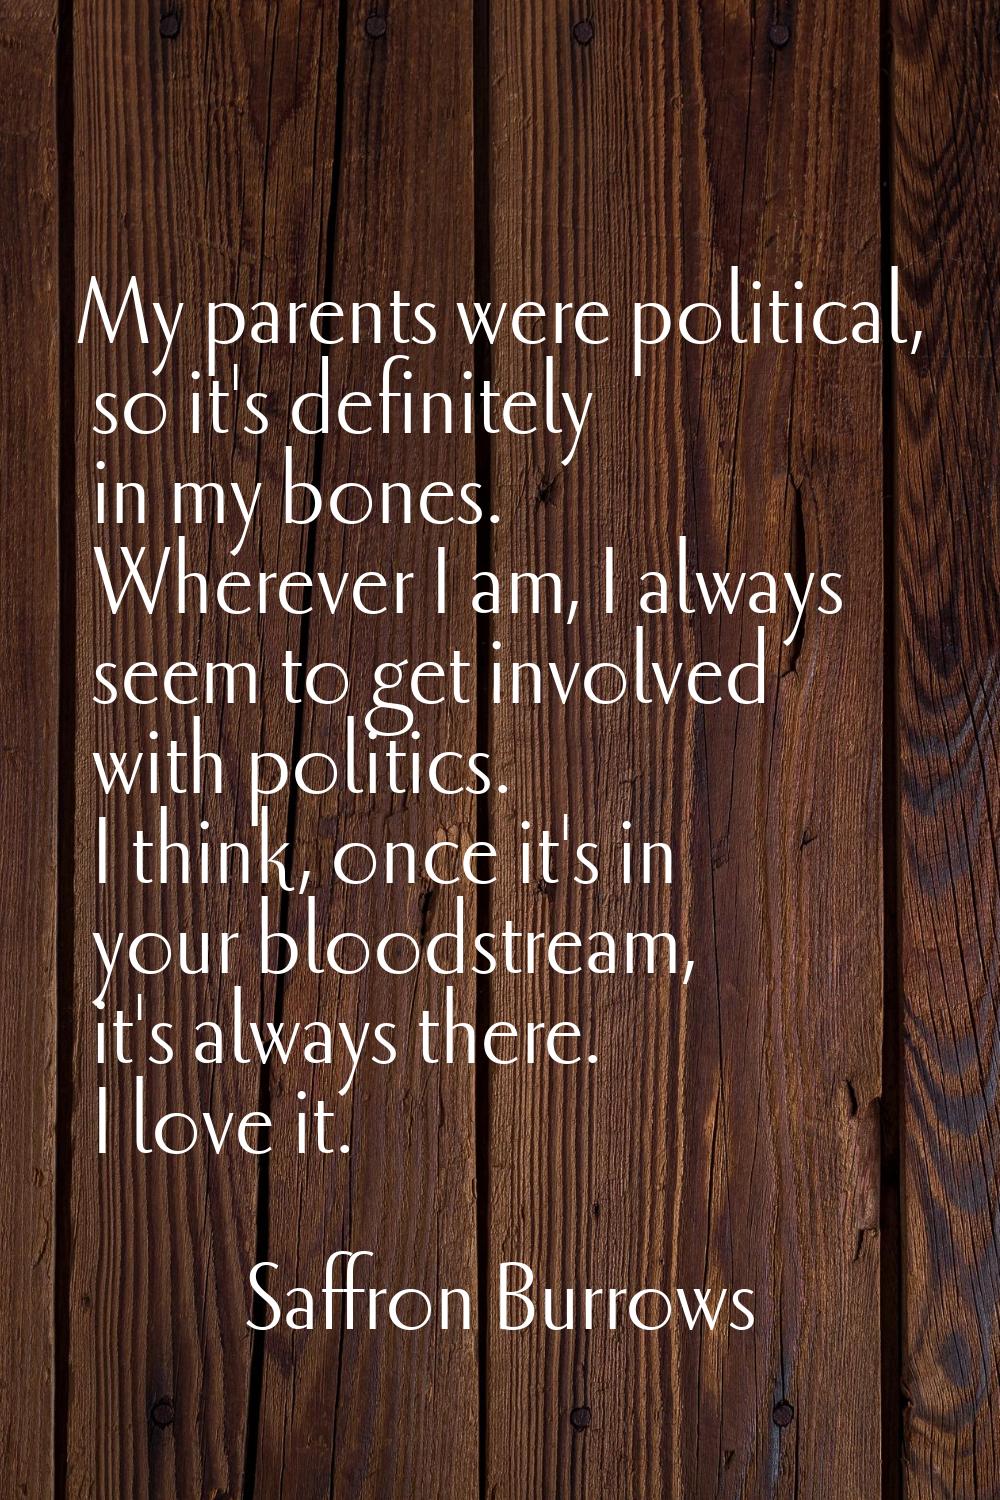 My parents were political, so it's definitely in my bones. Wherever I am, I always seem to get invo